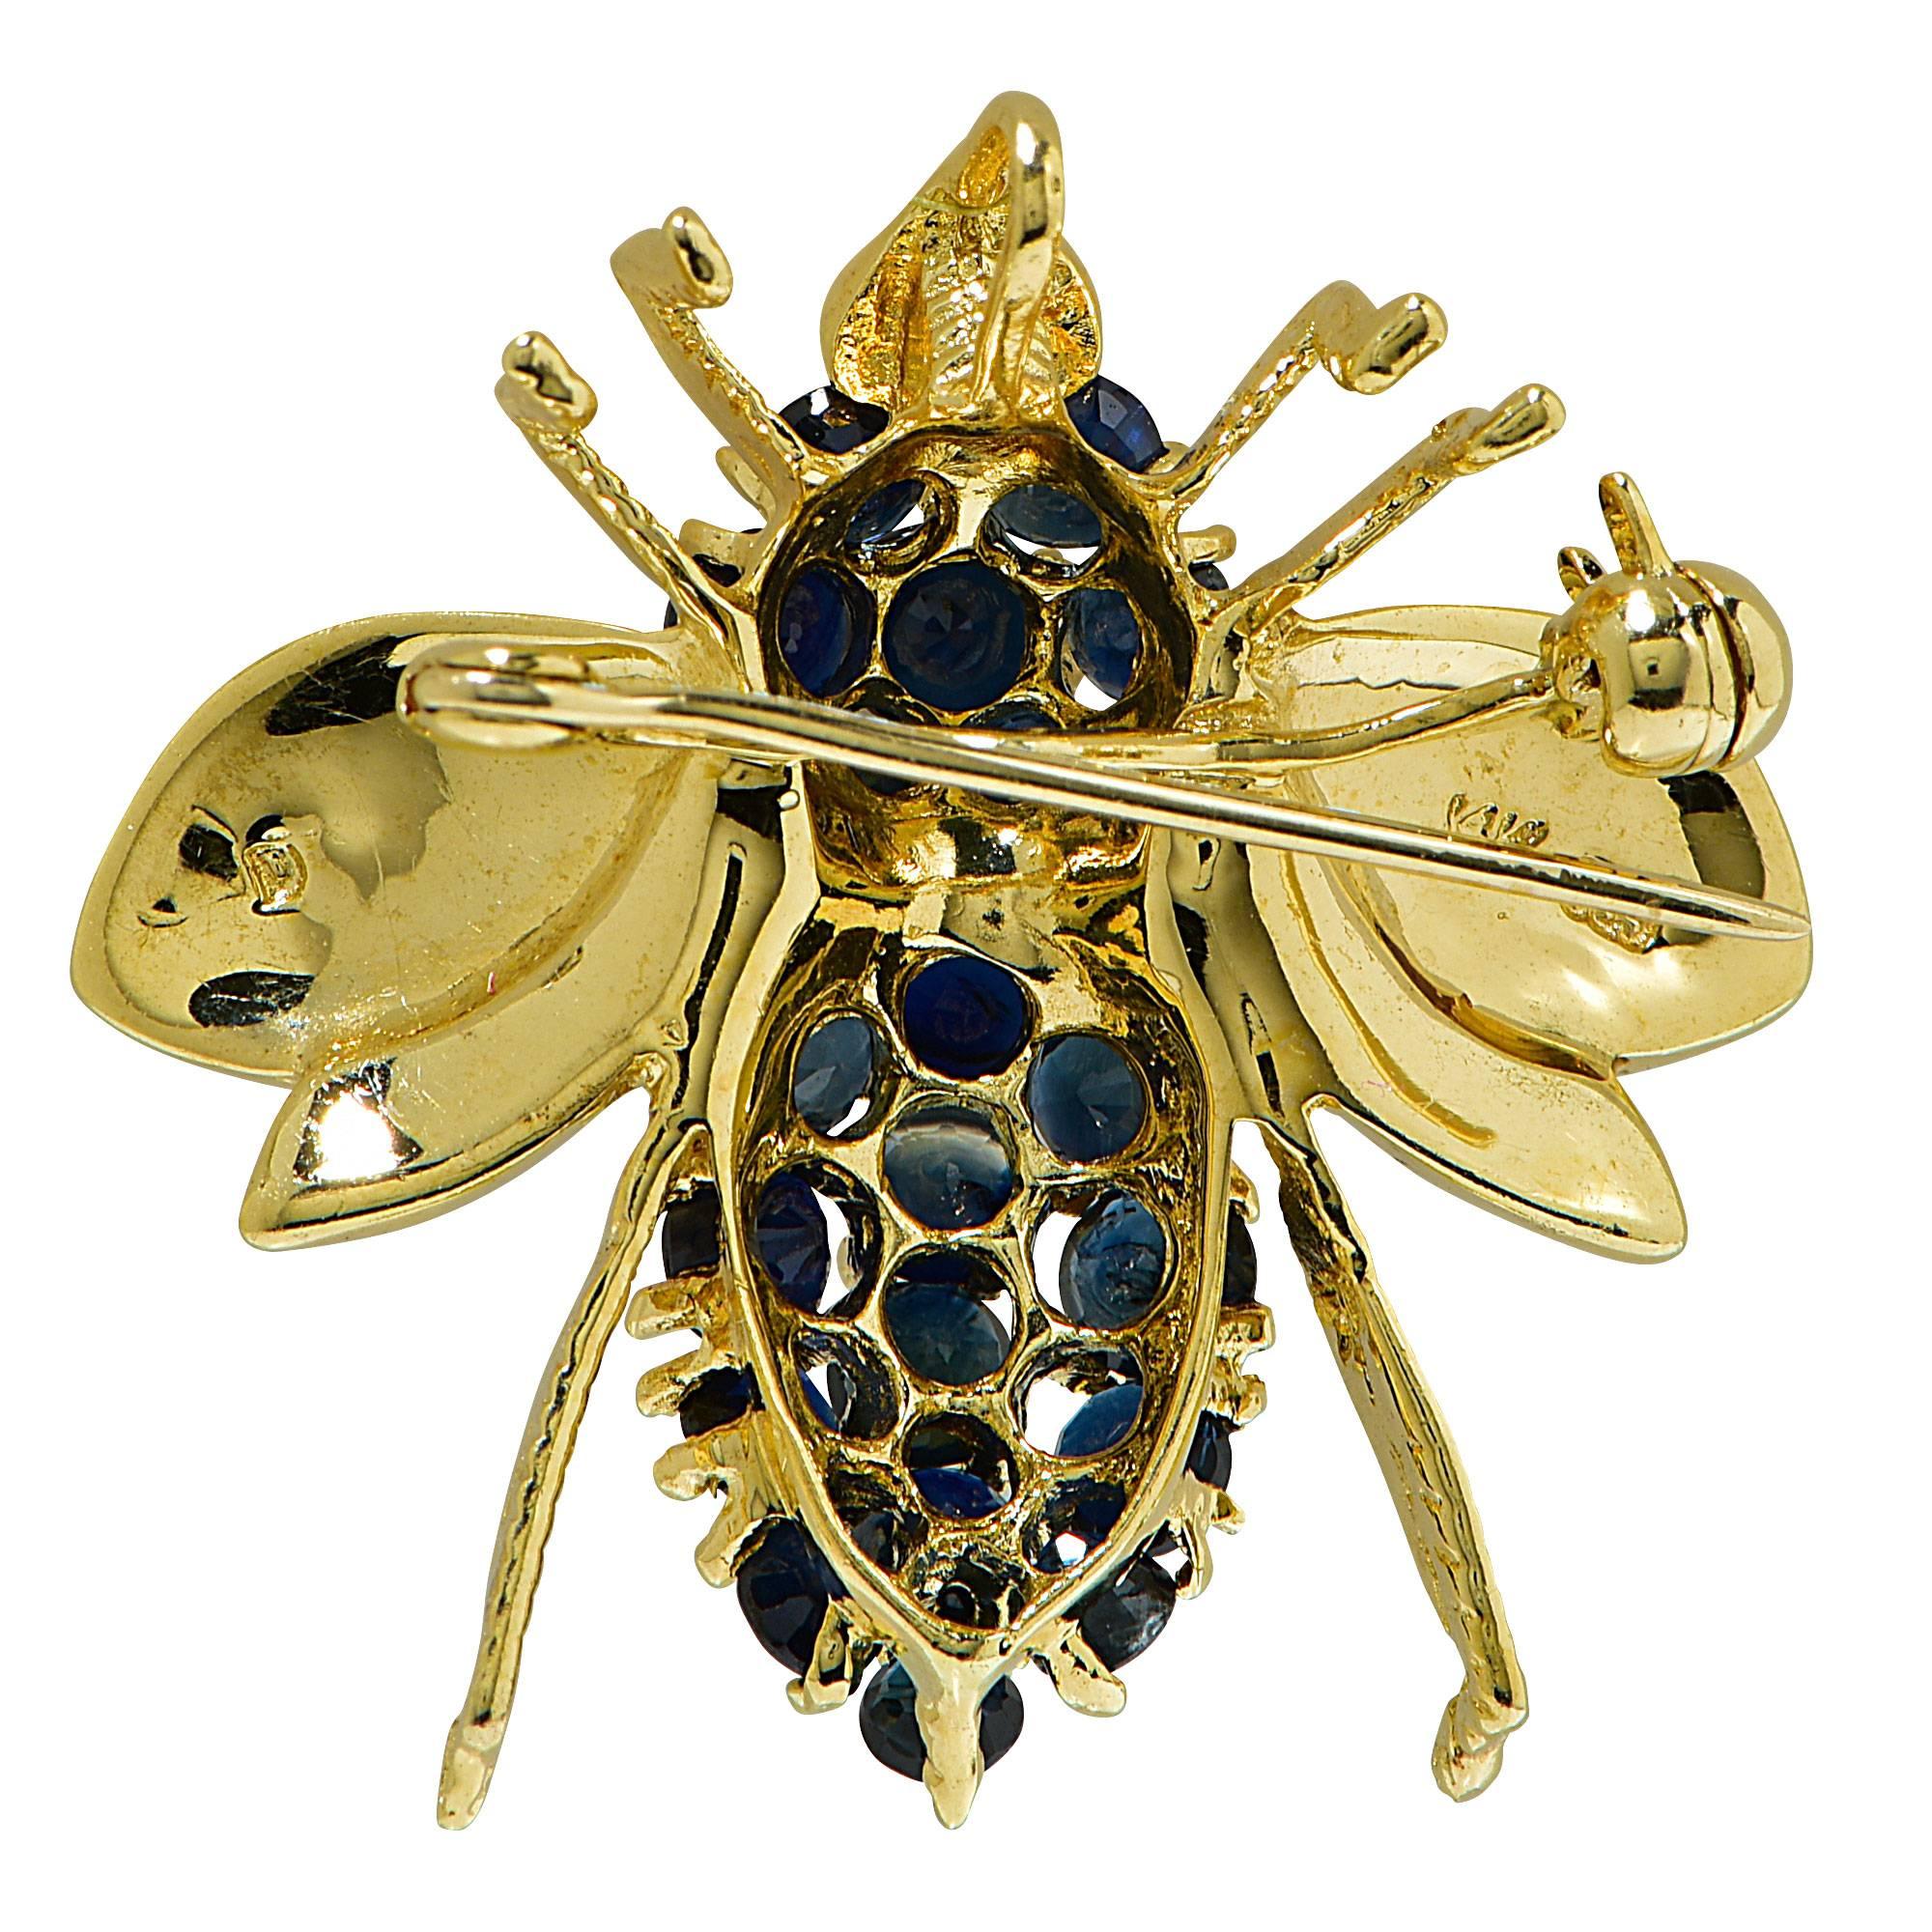 14k yellow gold fly brooch featuring approximately 2cts of round cut blue sapphires.

Metal weight: 5.36 grams

This sapphire brooch is accompanied by a retail appraisal performed by a GIA Graduate Gemologist.